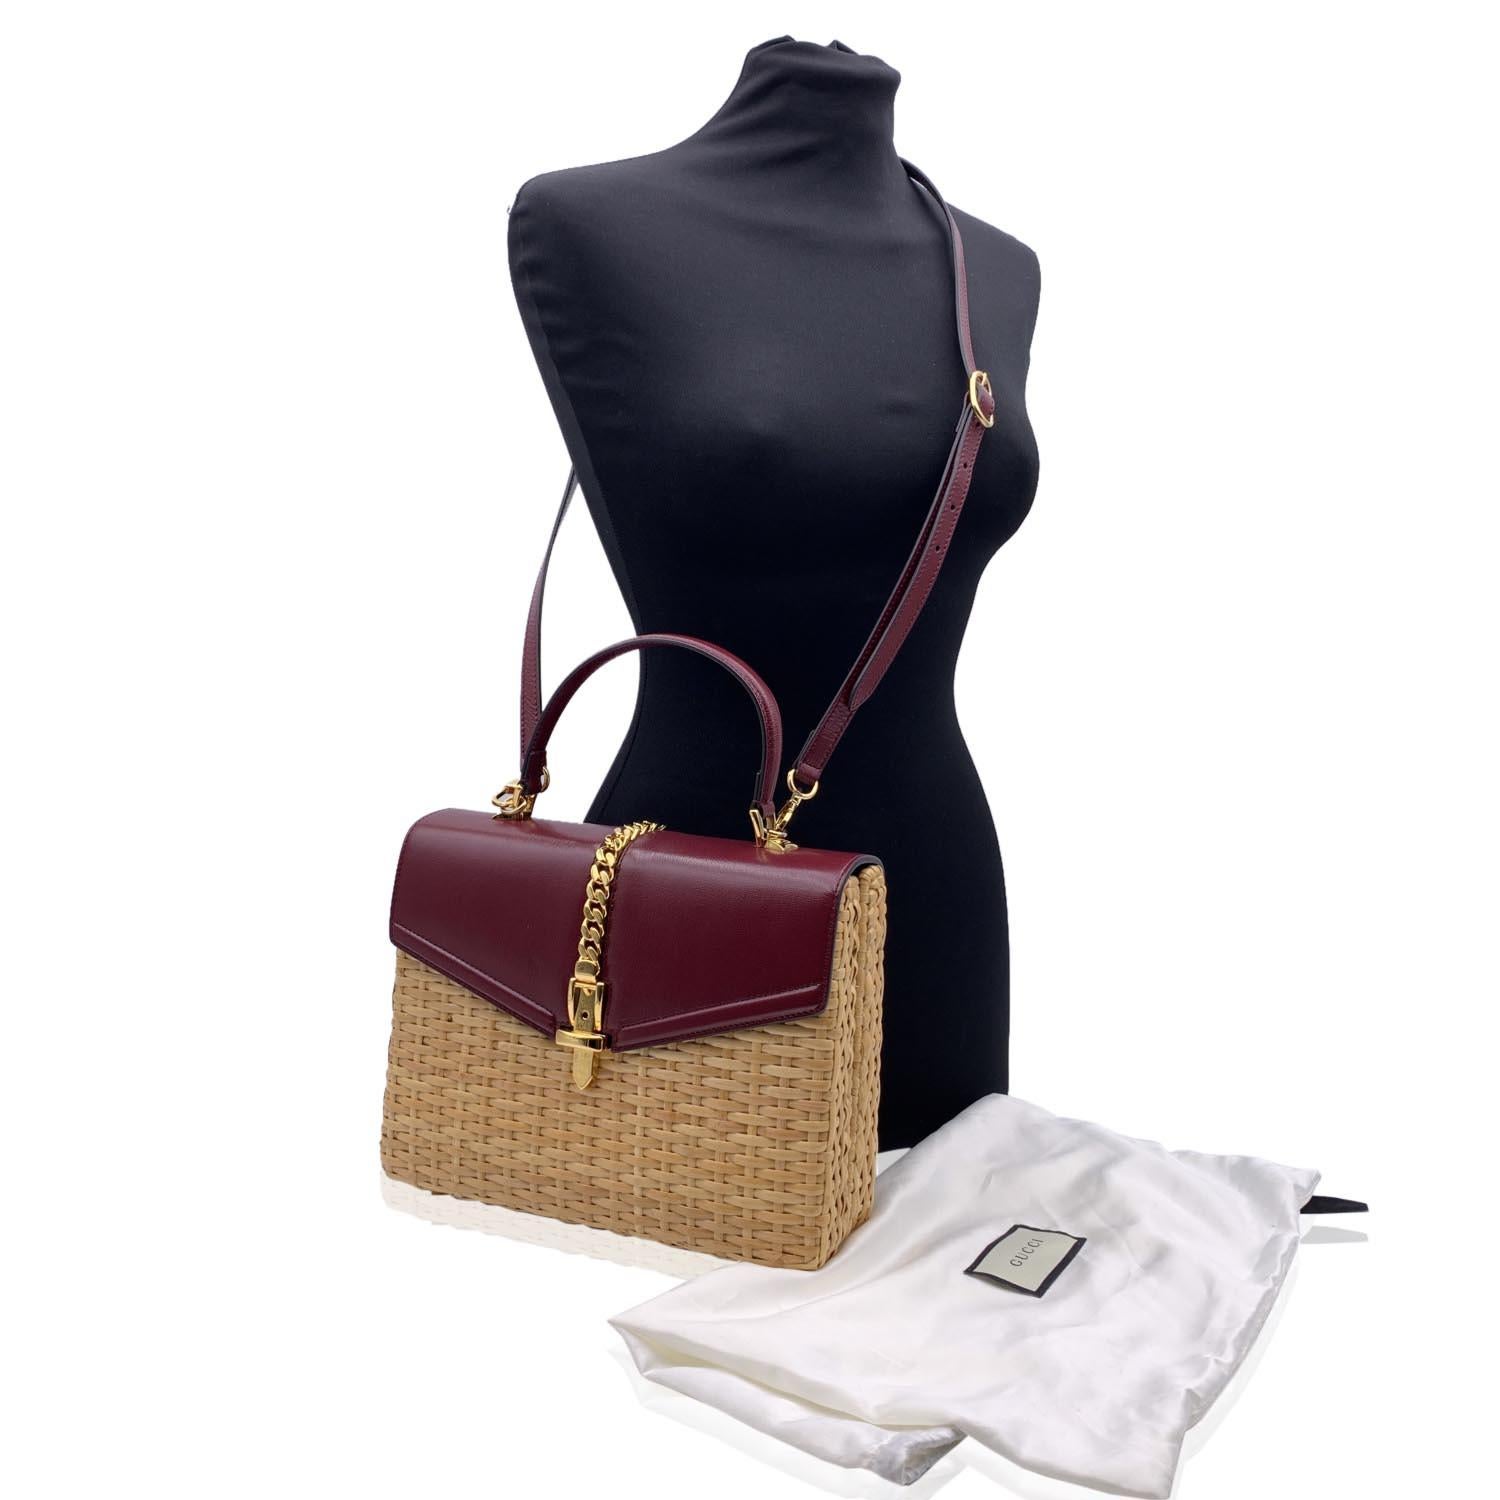 Stunning 'Sylvie' top handle bag by Gucci, from the Pre-Fall 2019 collection. This is the small version of the Sylvie satchel line, now discontinued. It is crafted in beige wicker and smooth burgundy leather with gold metal chuncky chain on top.